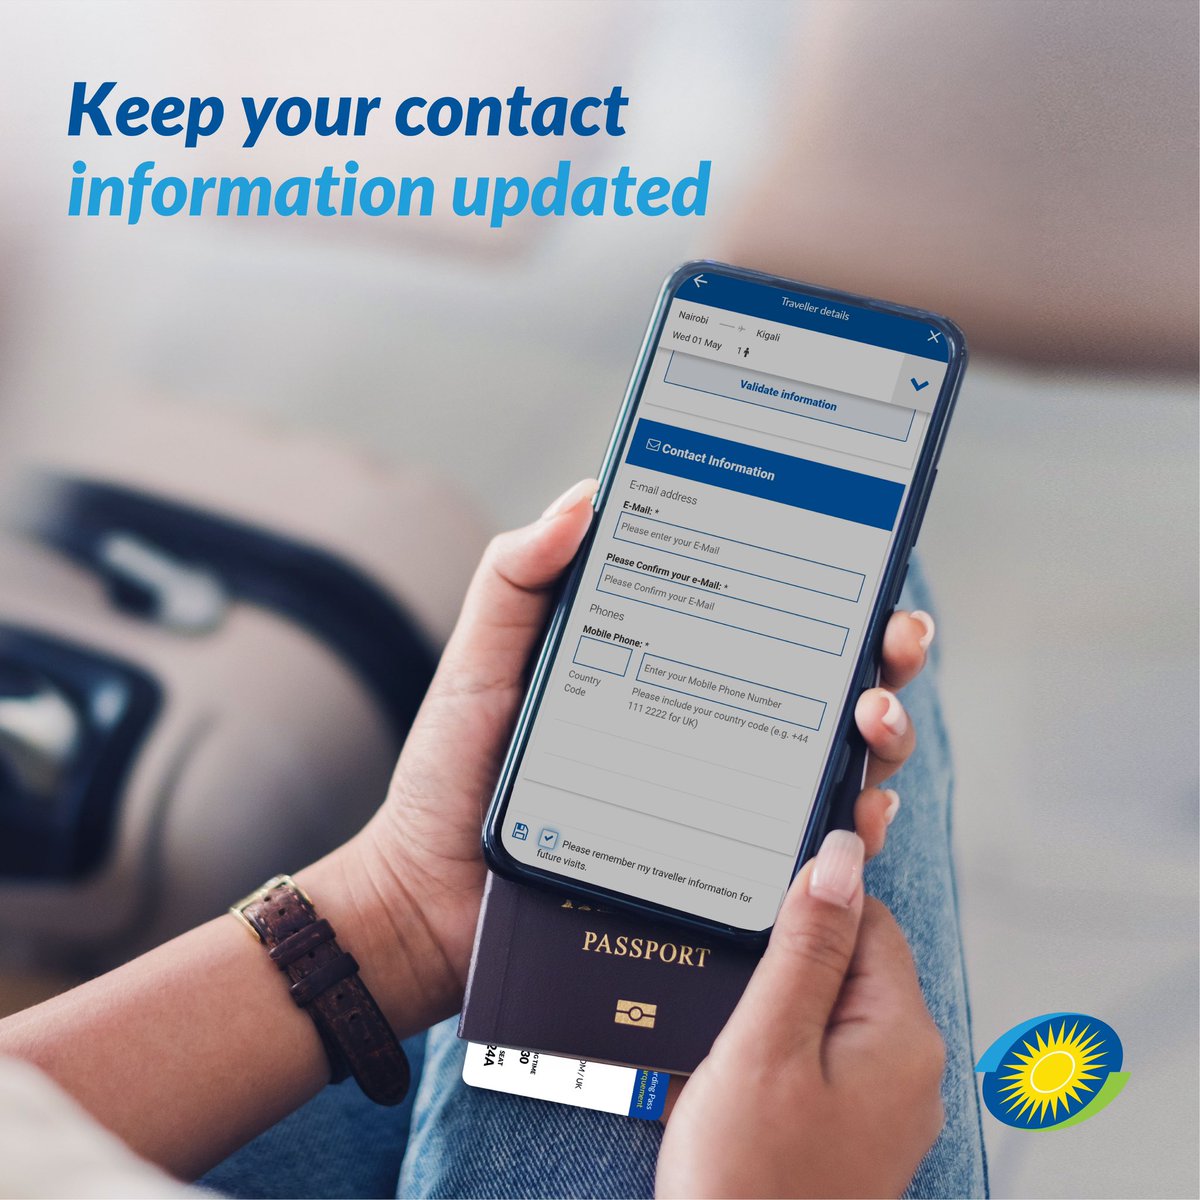 #TravelTip: Don't miss your flight updates! 

Make sure to provide your contact information when booking your next adventure, whether you're using a travel agency or booking directly with us.

#FlyTheDreamOfAfrica #FlySafeWithUs